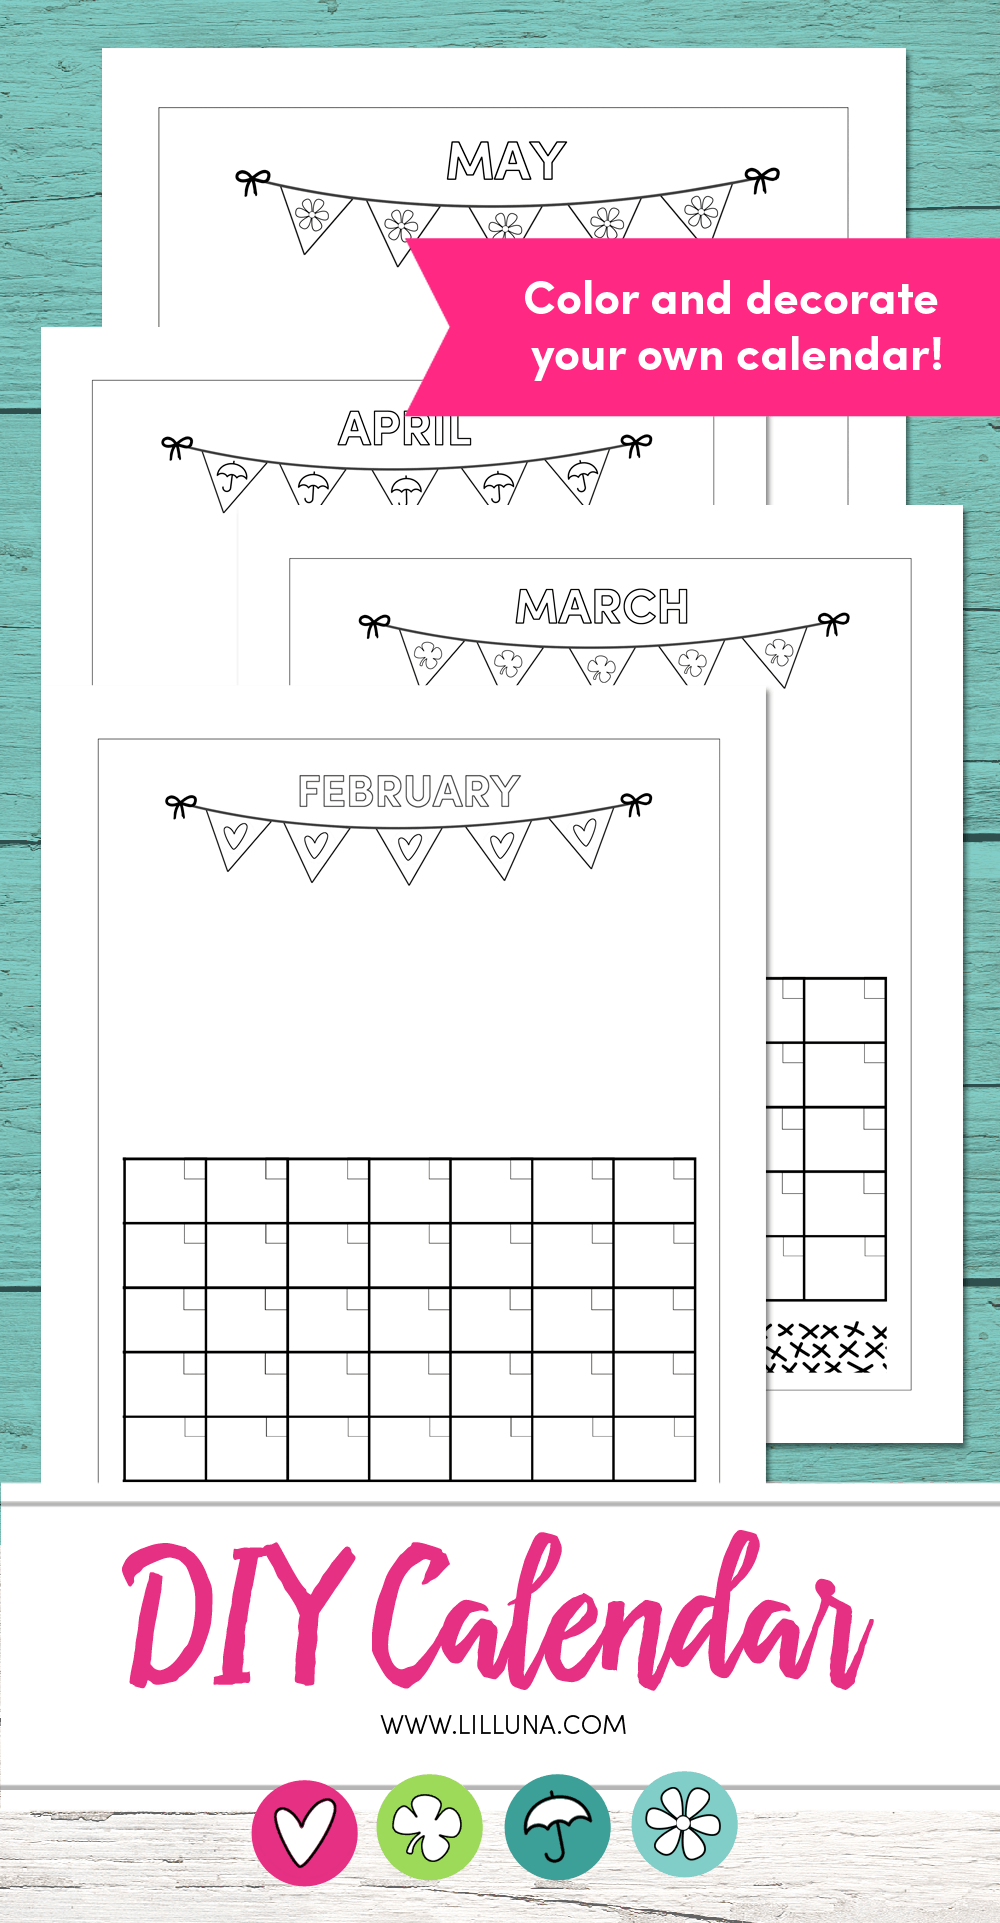 DIY Print and Color Calendars - let the kids print and color and gift these to grandparents or hang in your own home to display.